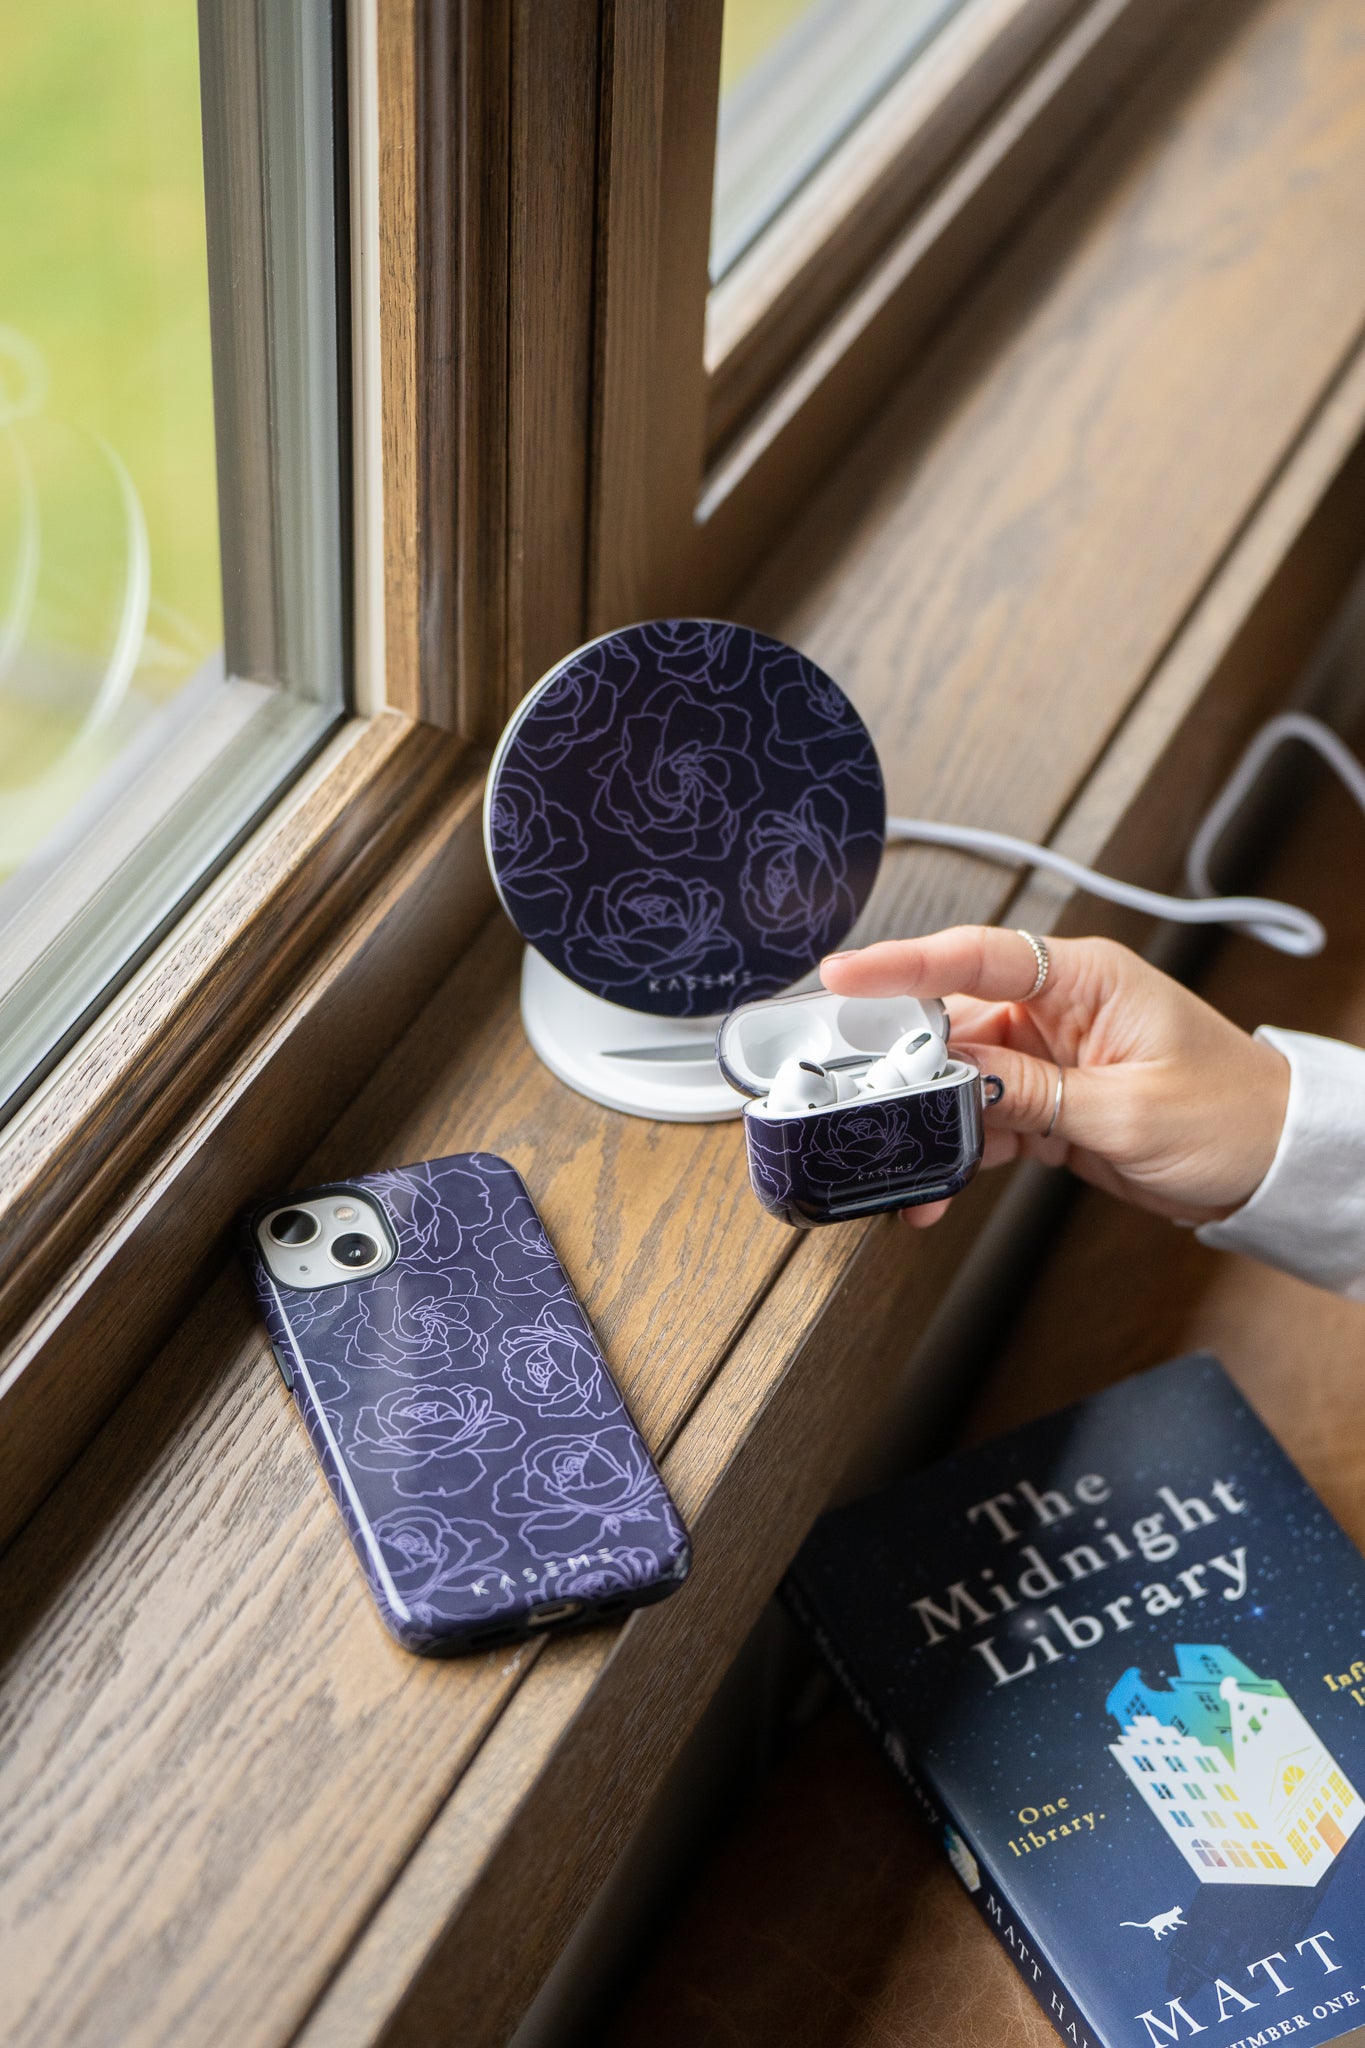 Polar Flowers wireless charger